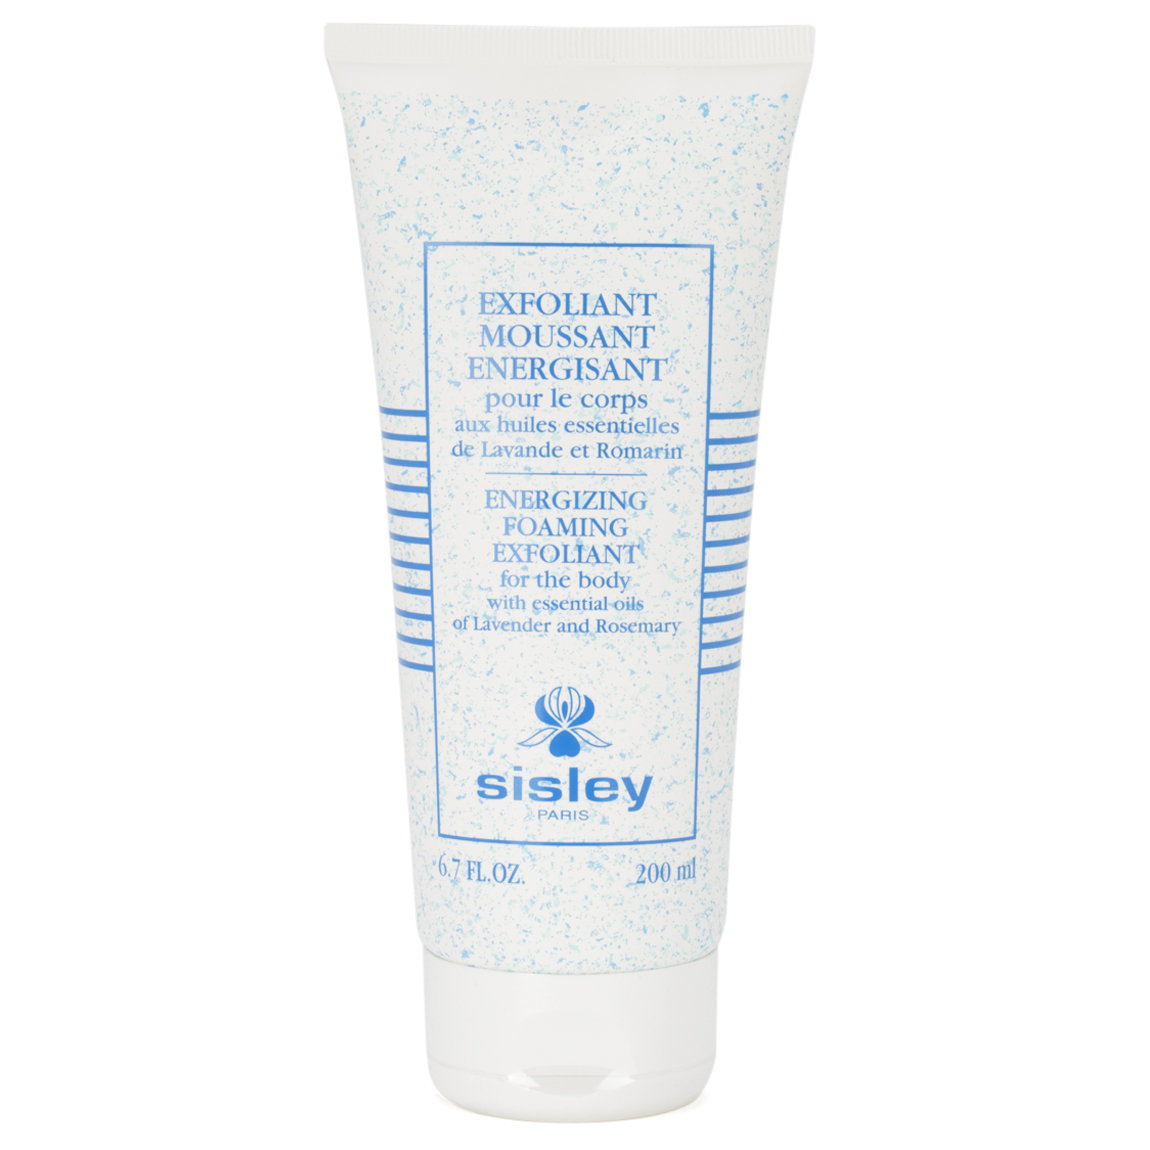 Sisley-Paris Energizing Foaming Exfoliant for the Body alternative view 1 - product swatch.